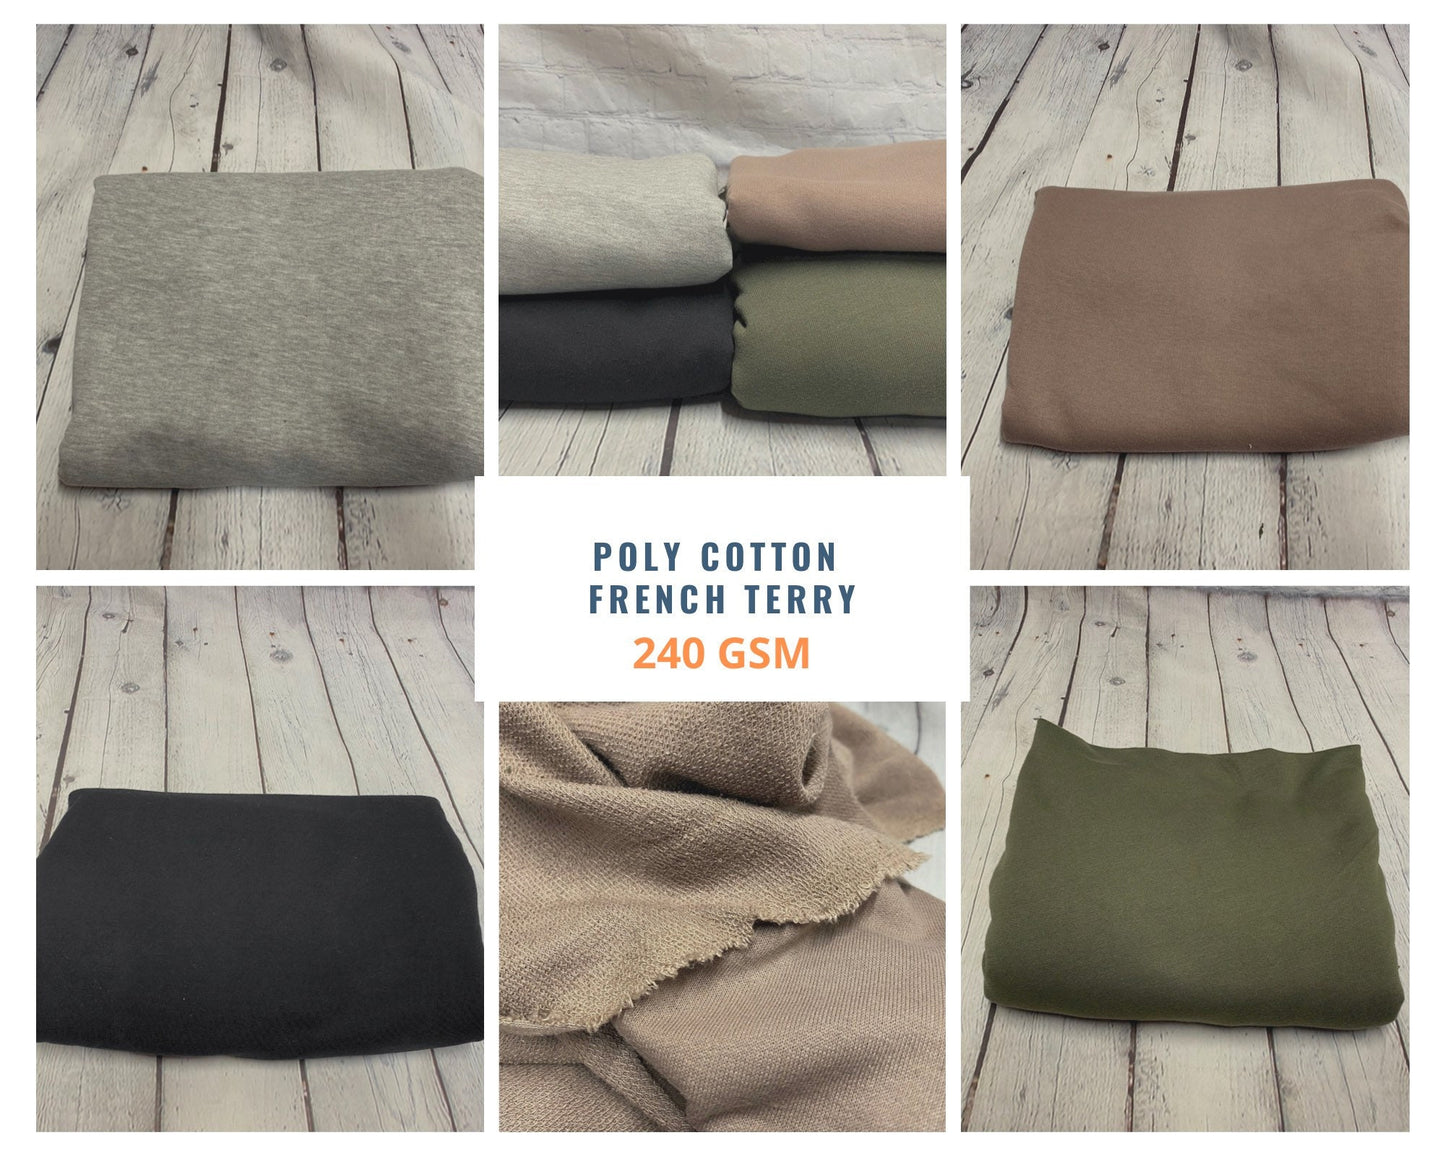 Soft Poly Cotton French Terry Knit Fabric By The Yard 240 GSM